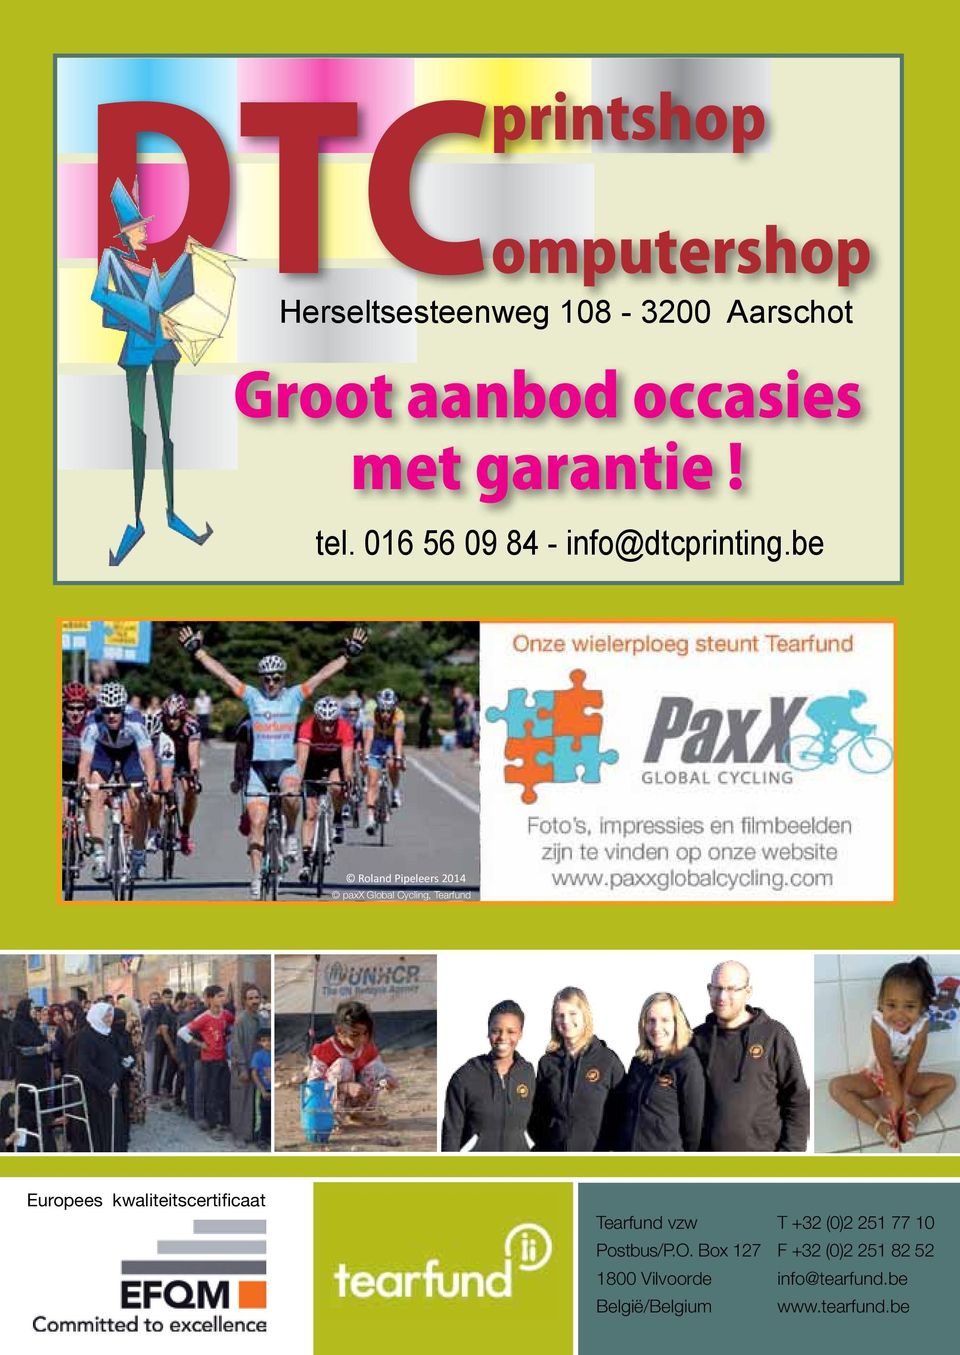 be Roland Pipeleers 2014 paxx Global Cycling, Tearfund Europees kwaliteitscertificaat